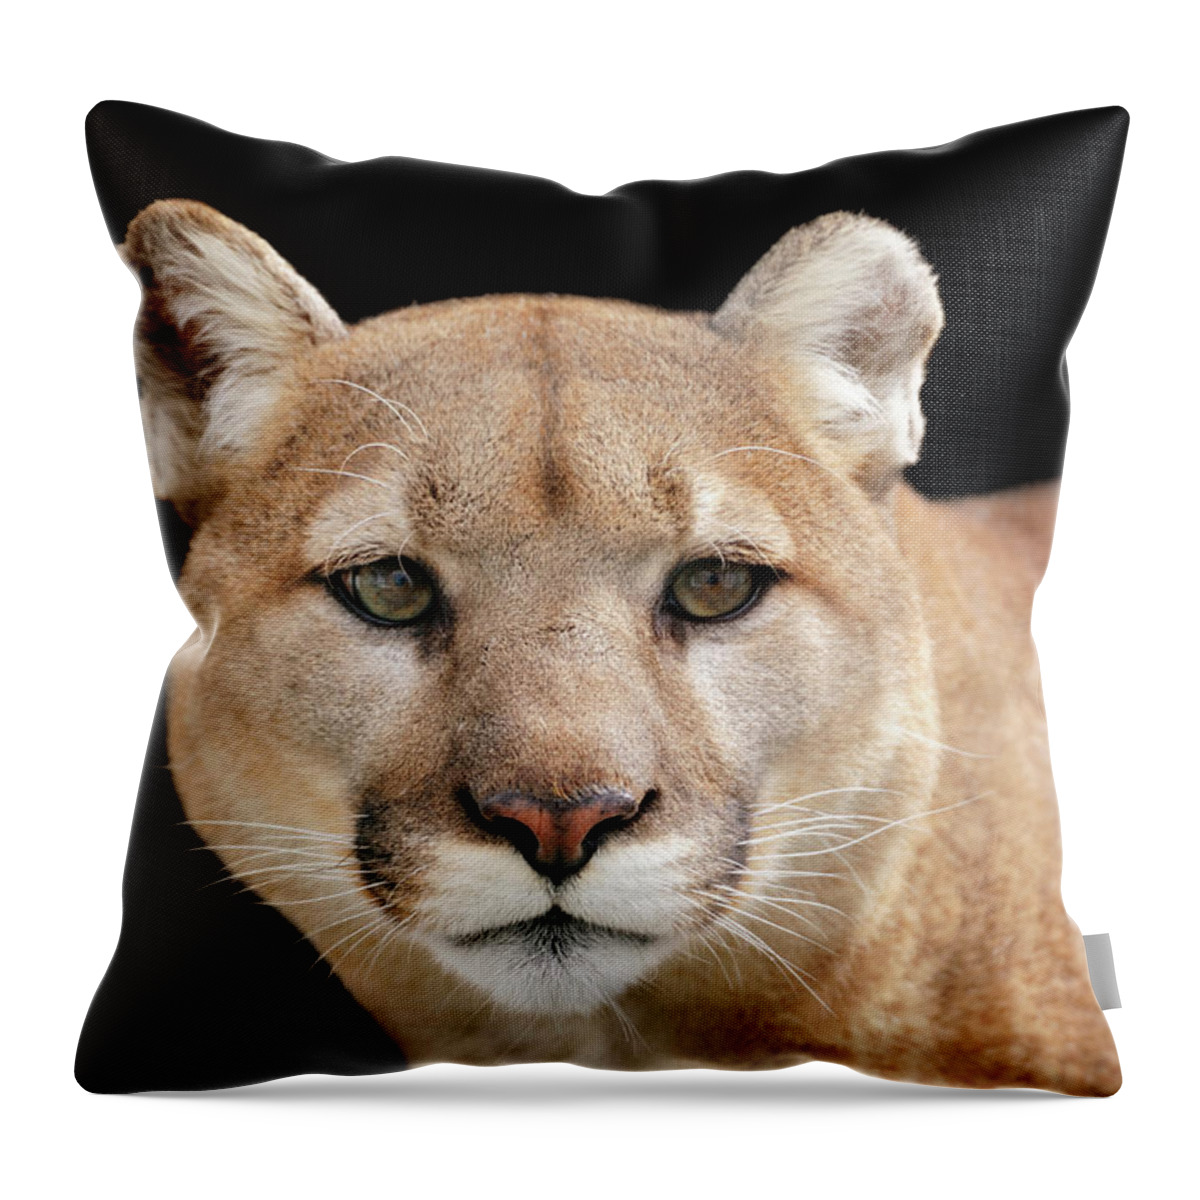 Big Cat Throw Pillow featuring the photograph Portrait Of A Puma Looking Beyond The by Freder